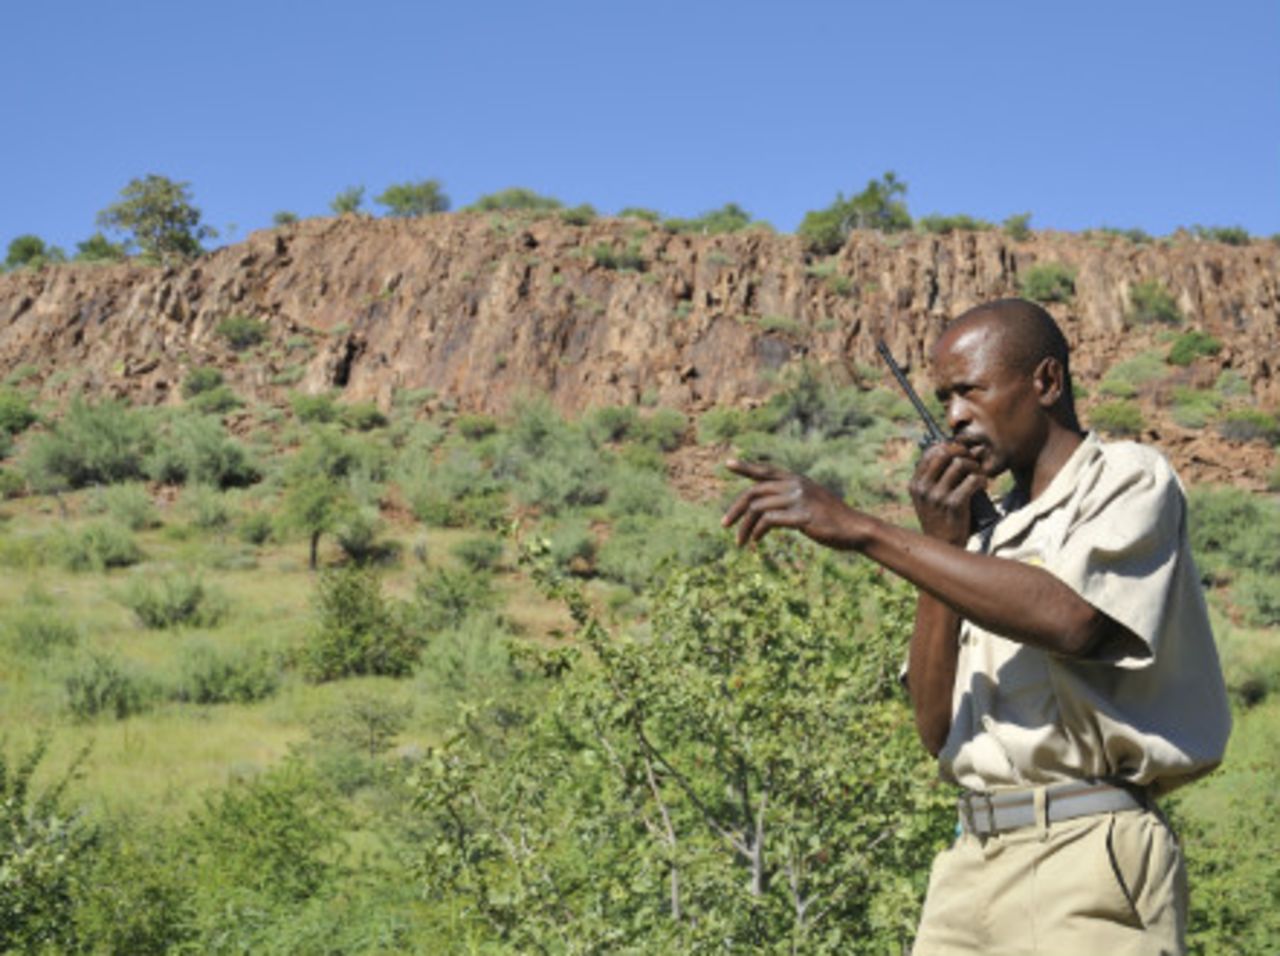 In Namibia, former poachers are now gamekeepers - (Courtesy WWF Namibia)